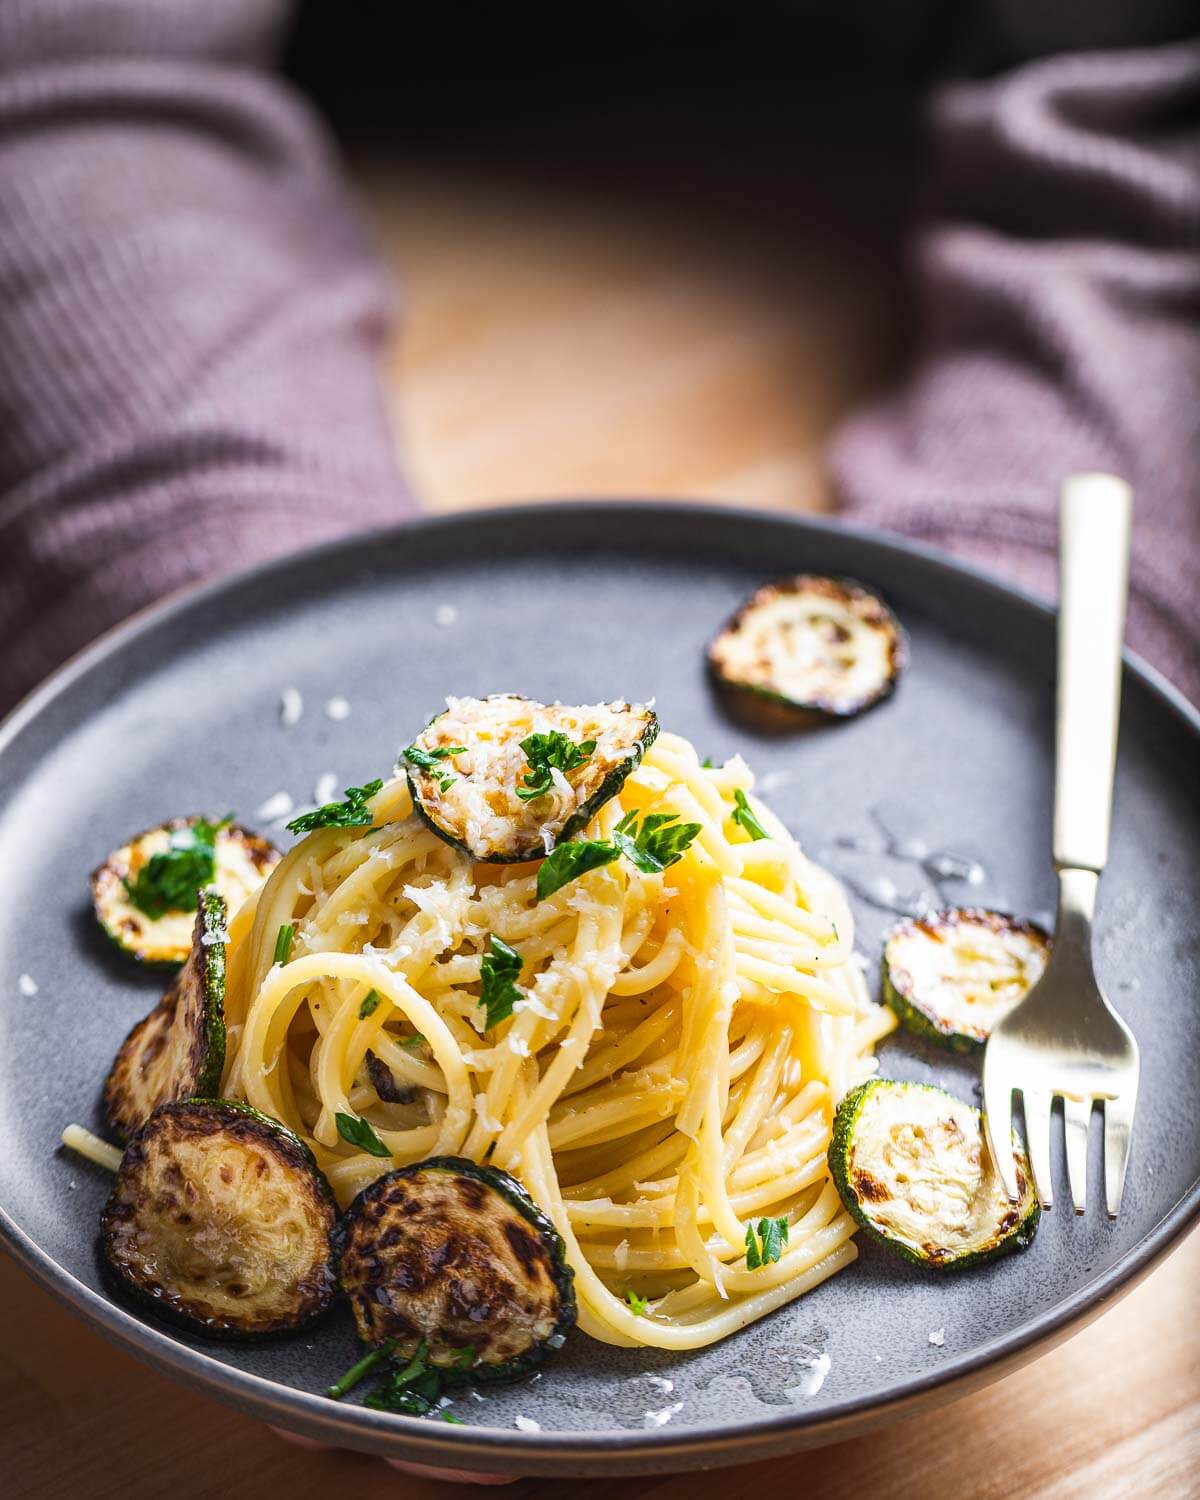 Grey plate held in hands with a nest of spaghetti and seared zucchini.